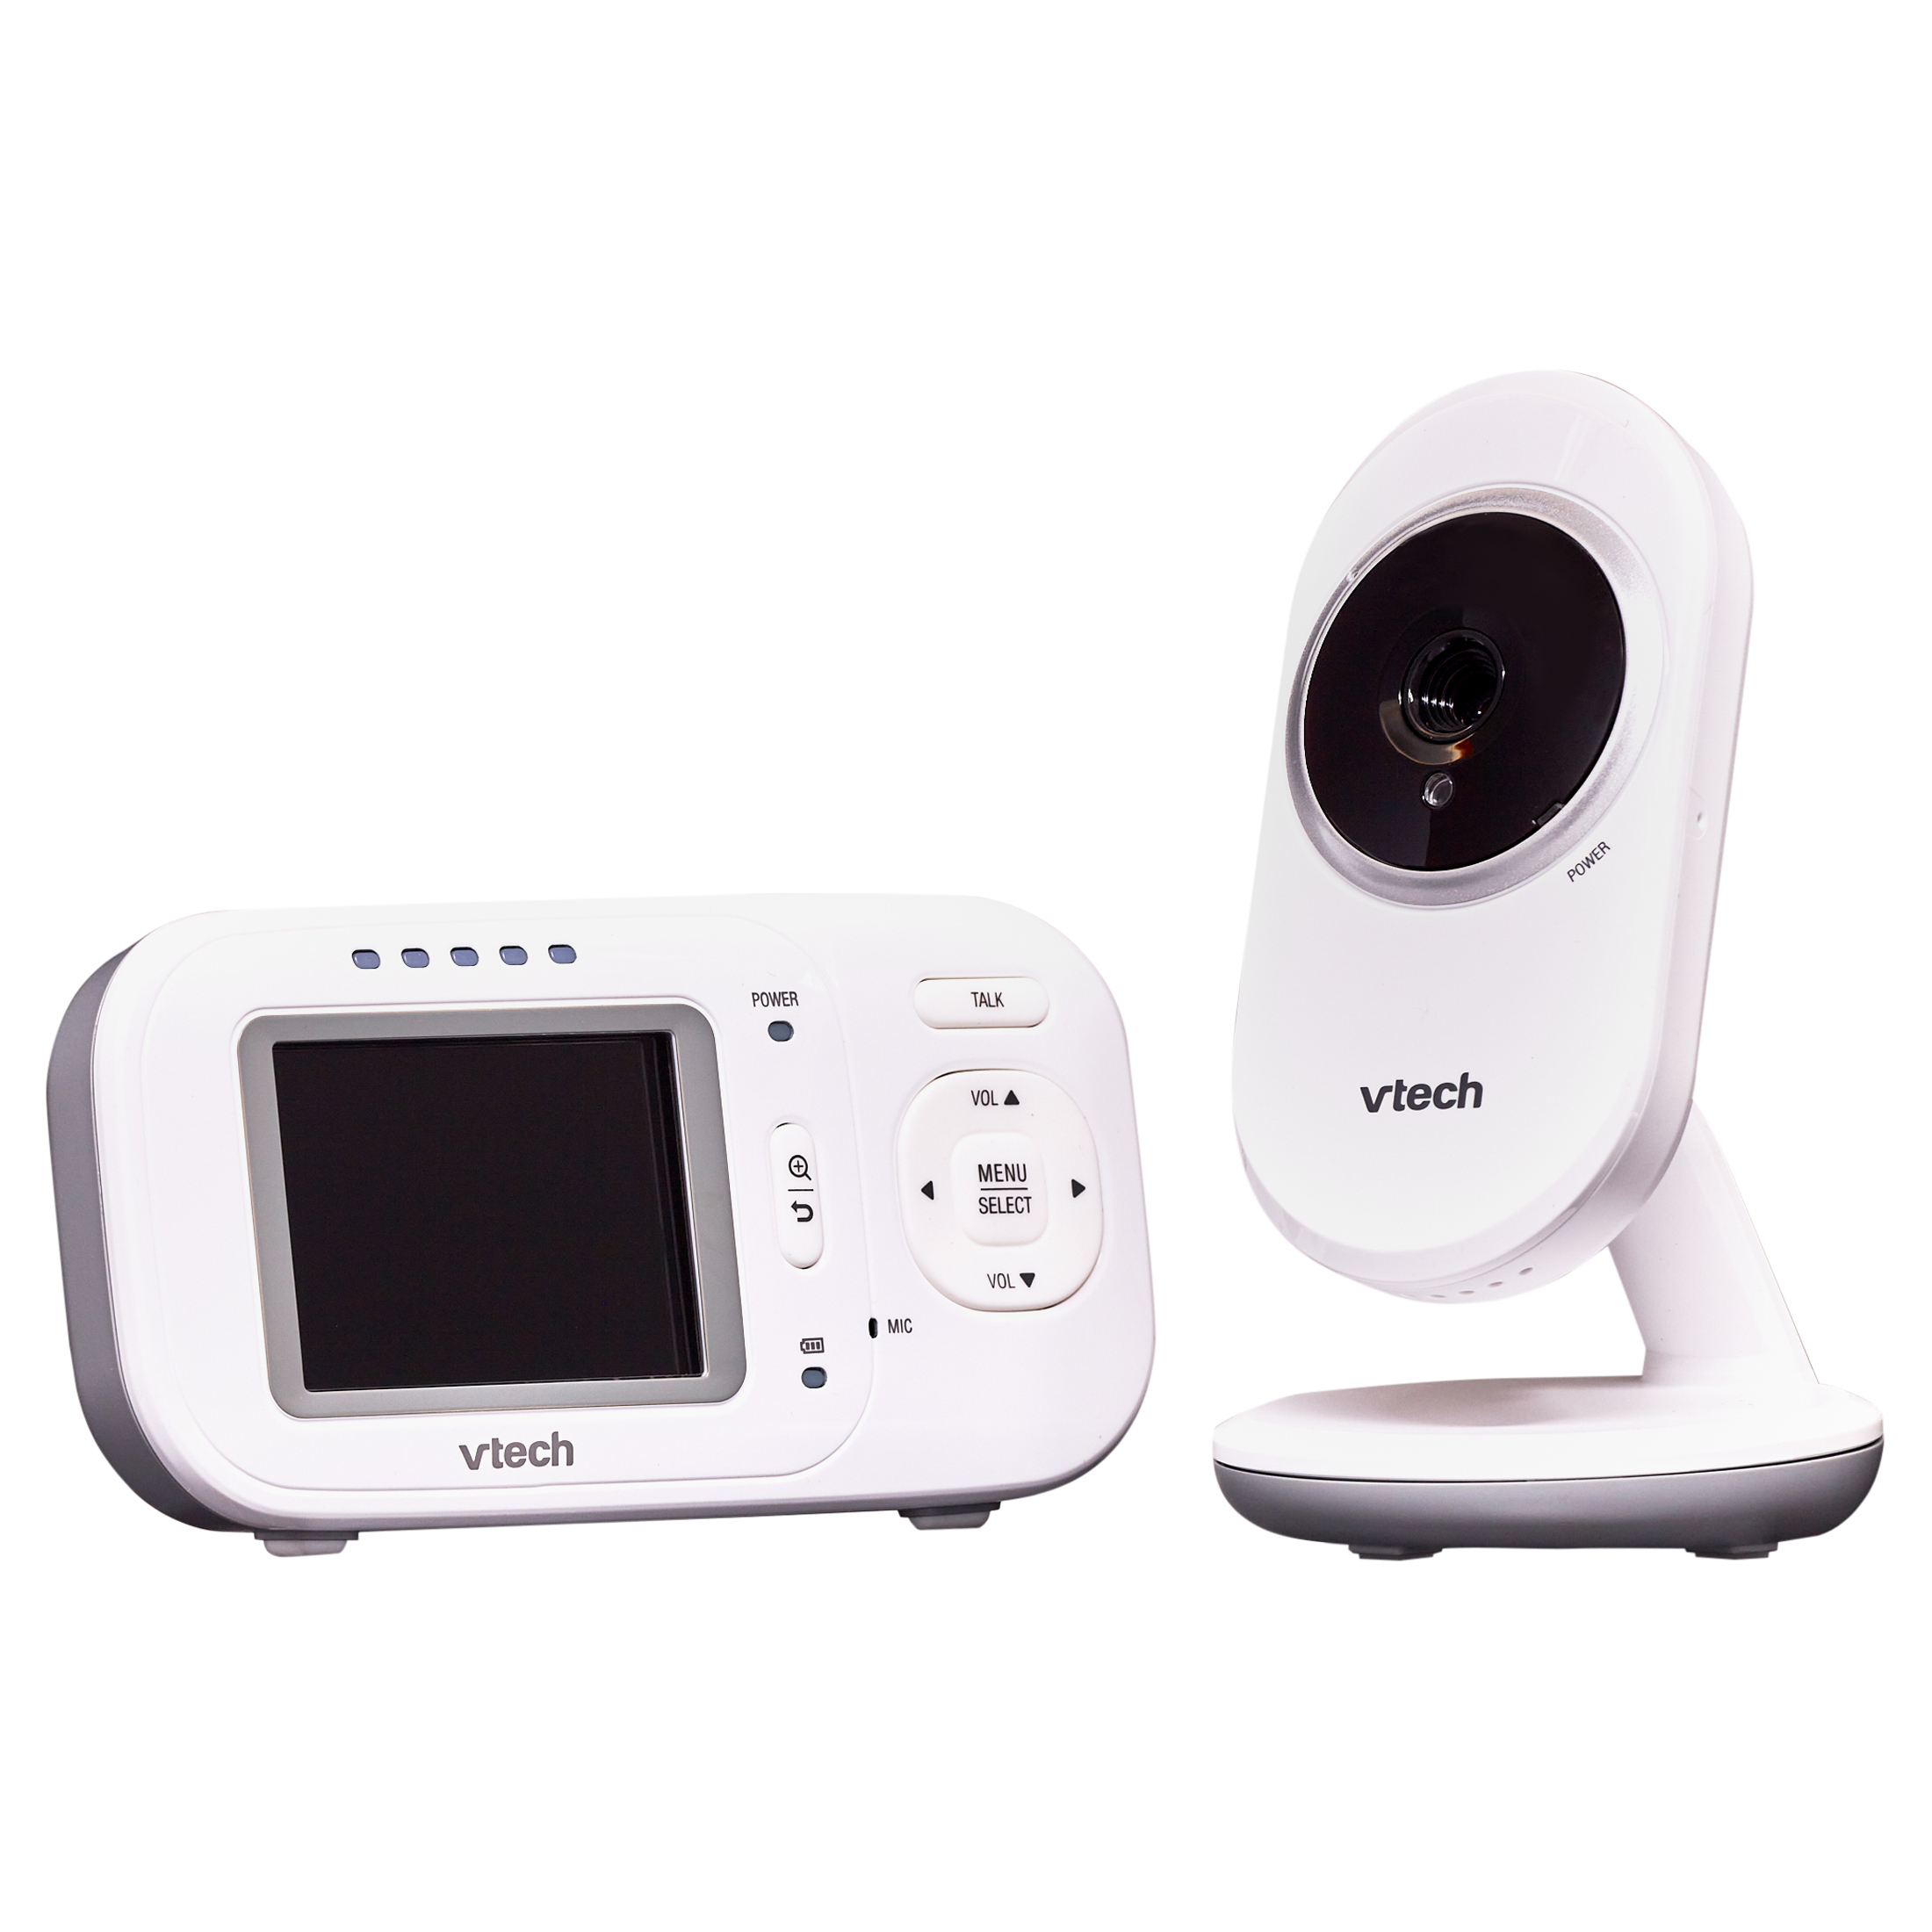 VTech VM320 2.4" Video Baby Monitor with Full-Color and Automatic Night Vision, White - image 1 of 8